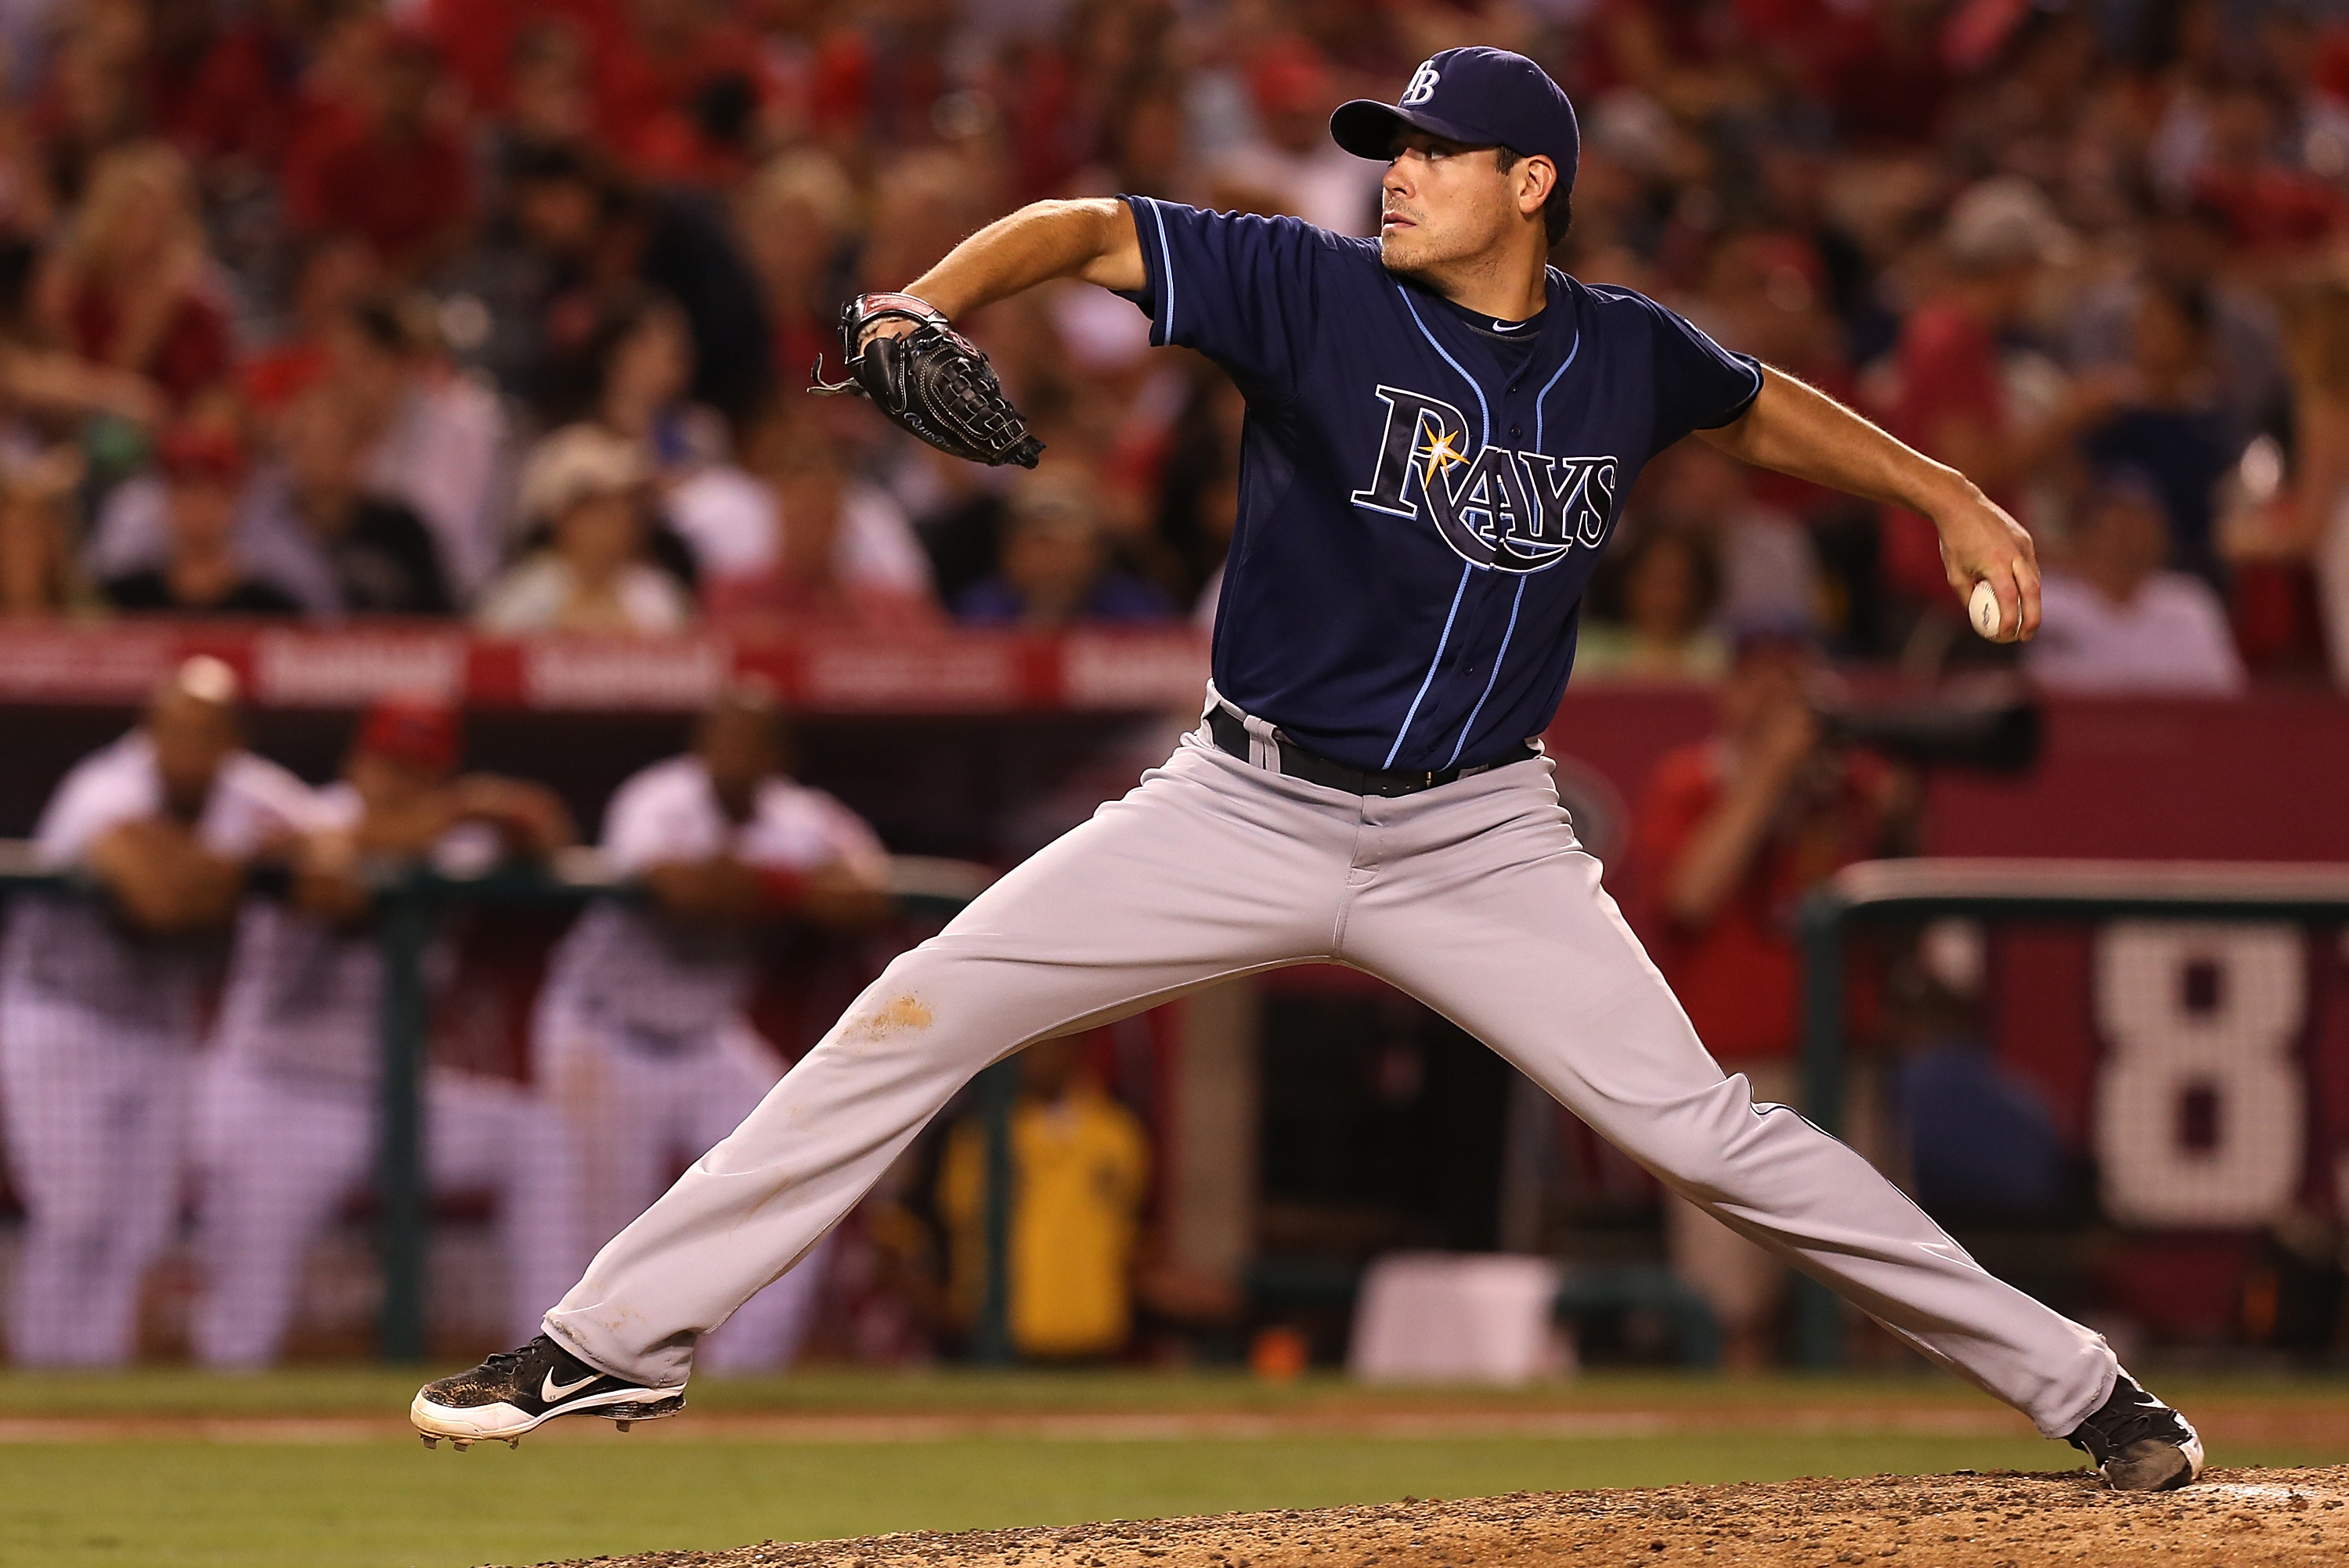 Matt Moore struggles again as Rays lose to Orioles (w/video)